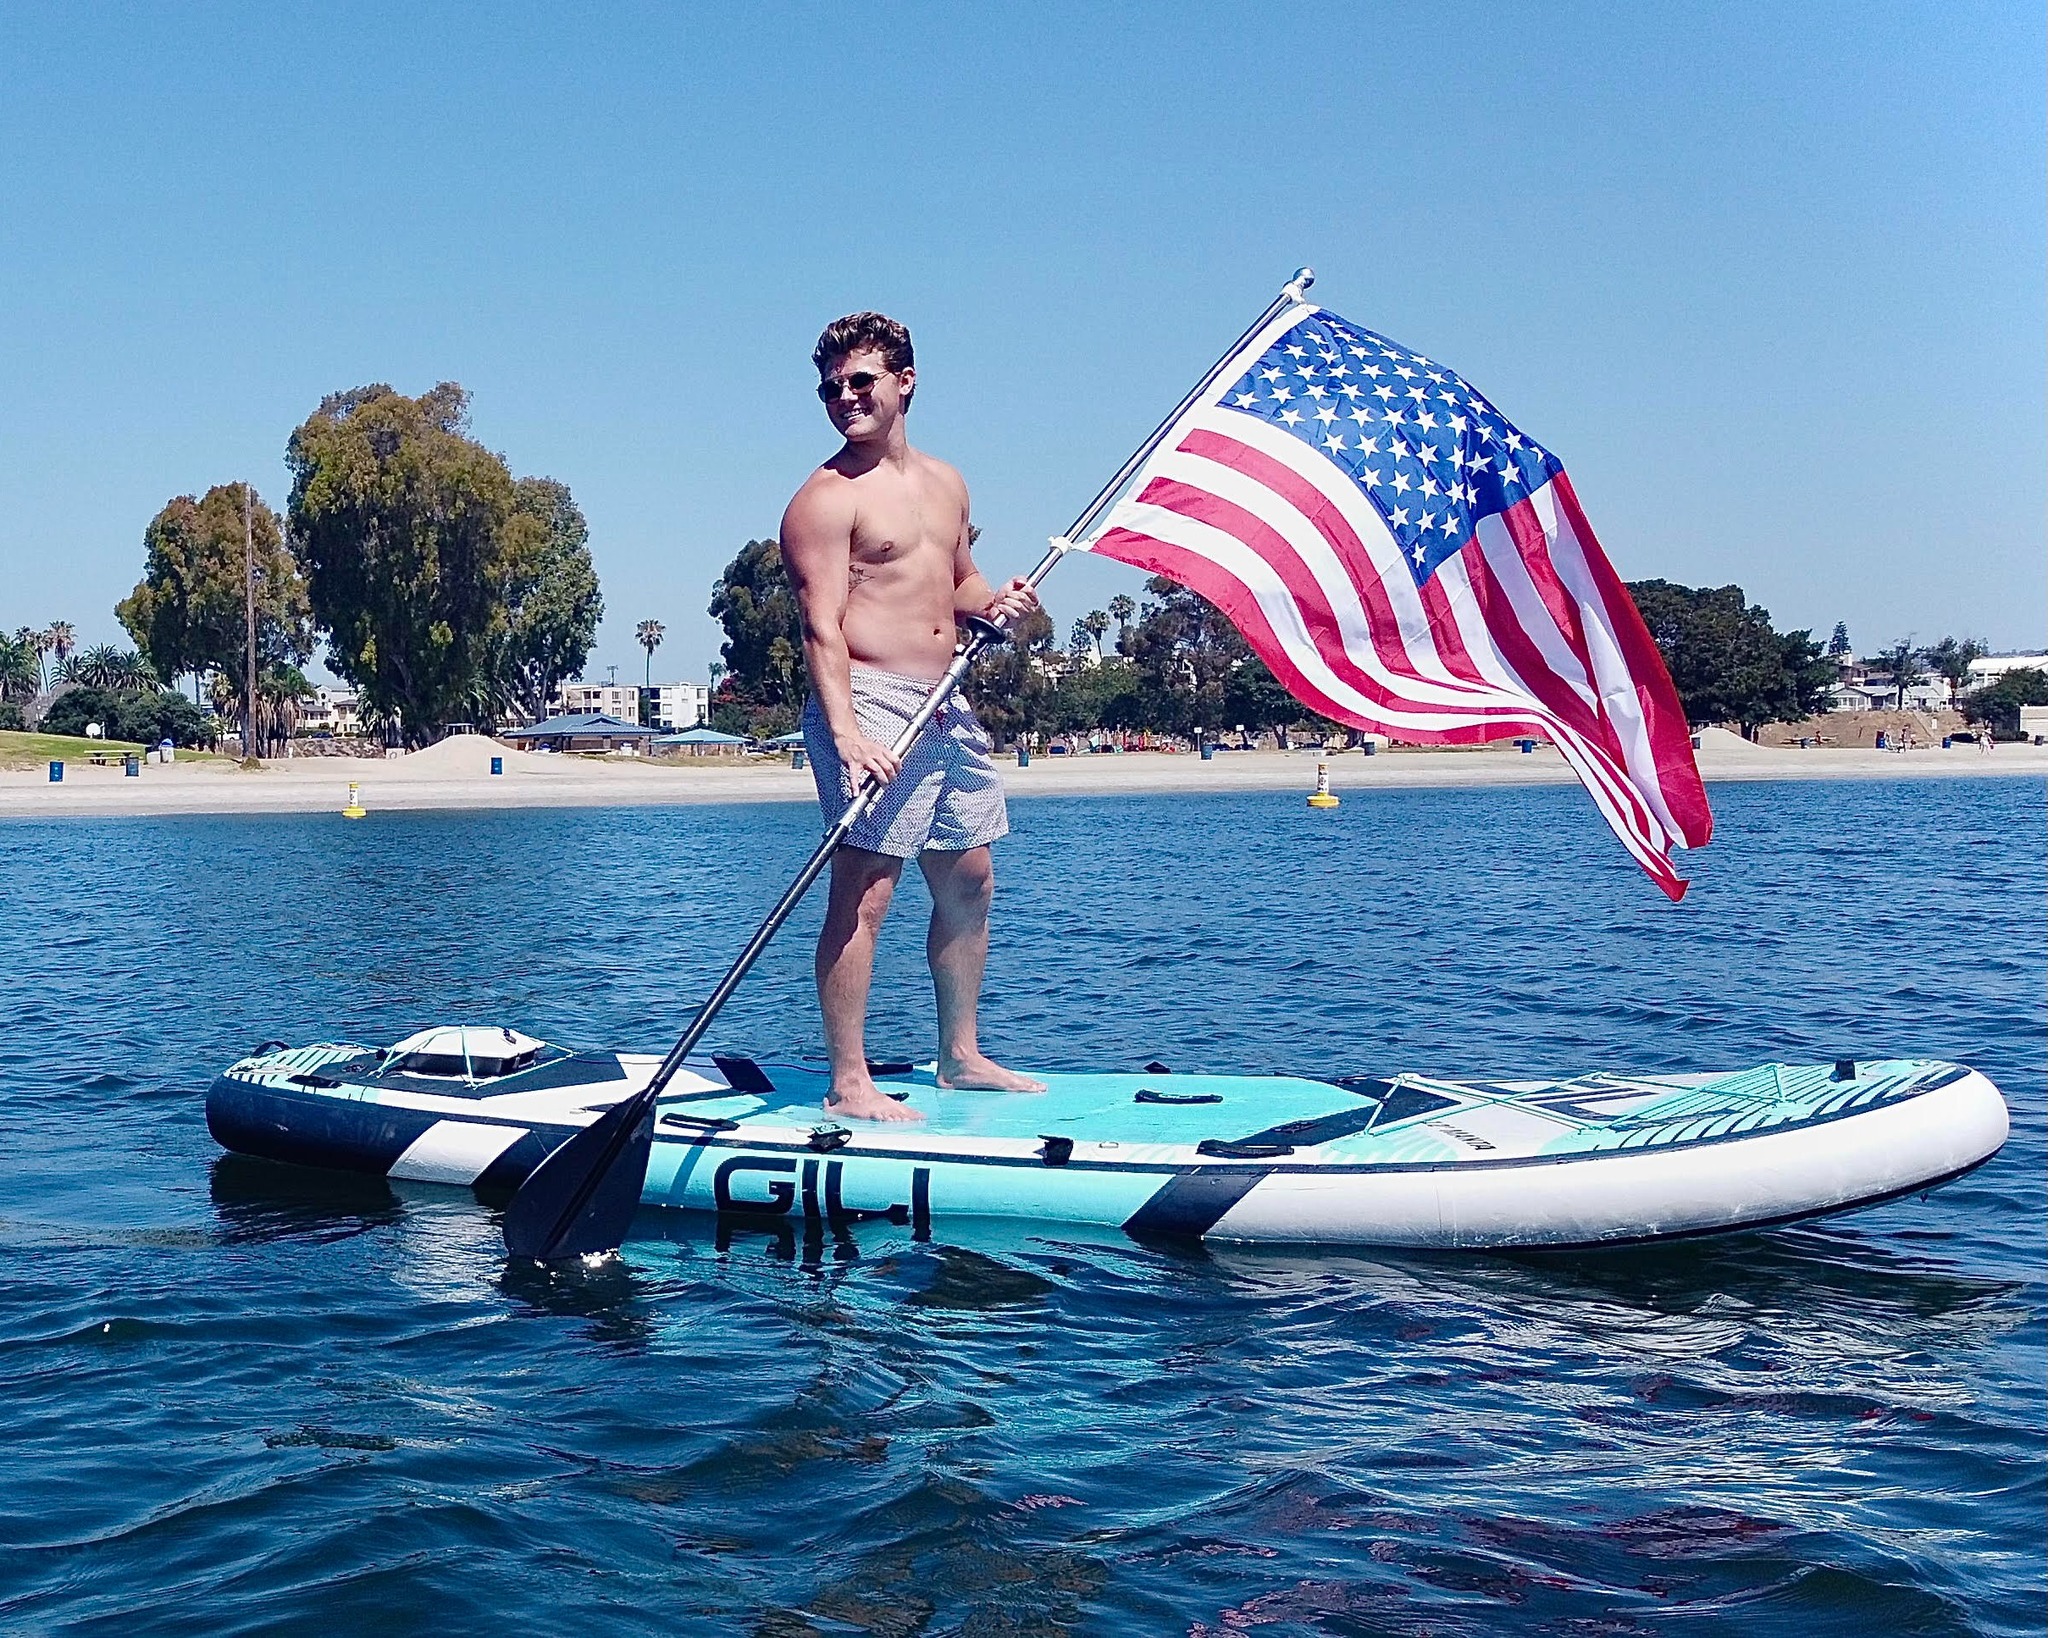 Man on standup paddleboard with American flag and Bixpy motor